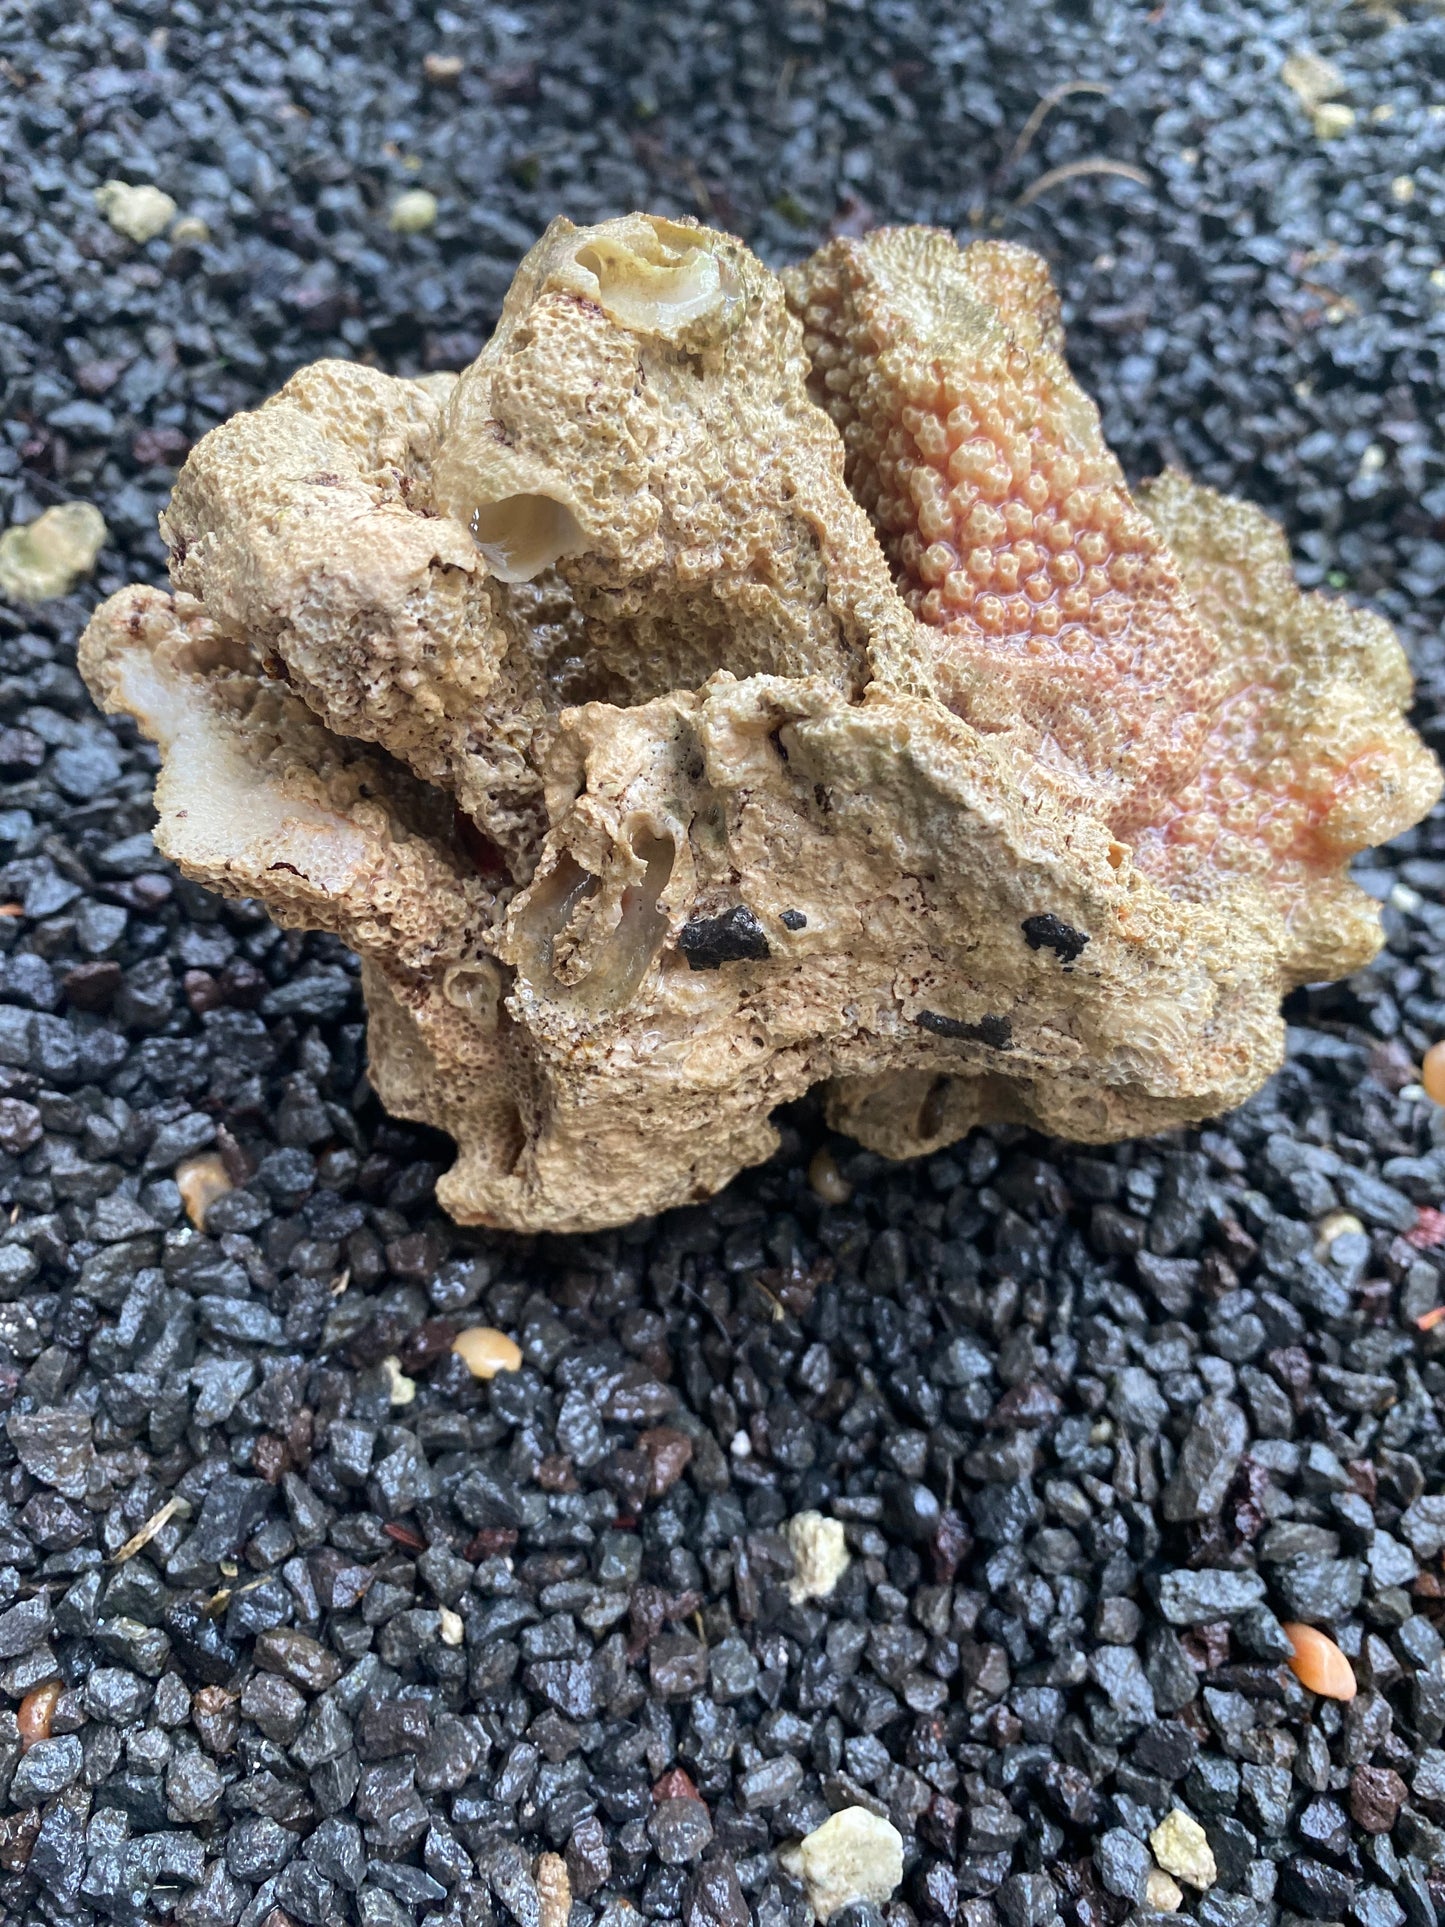 Natural Rare Coral Fossil, Beach Pebble Or Lava Rocks With Or Without Live Algae For Aquarium Decoration